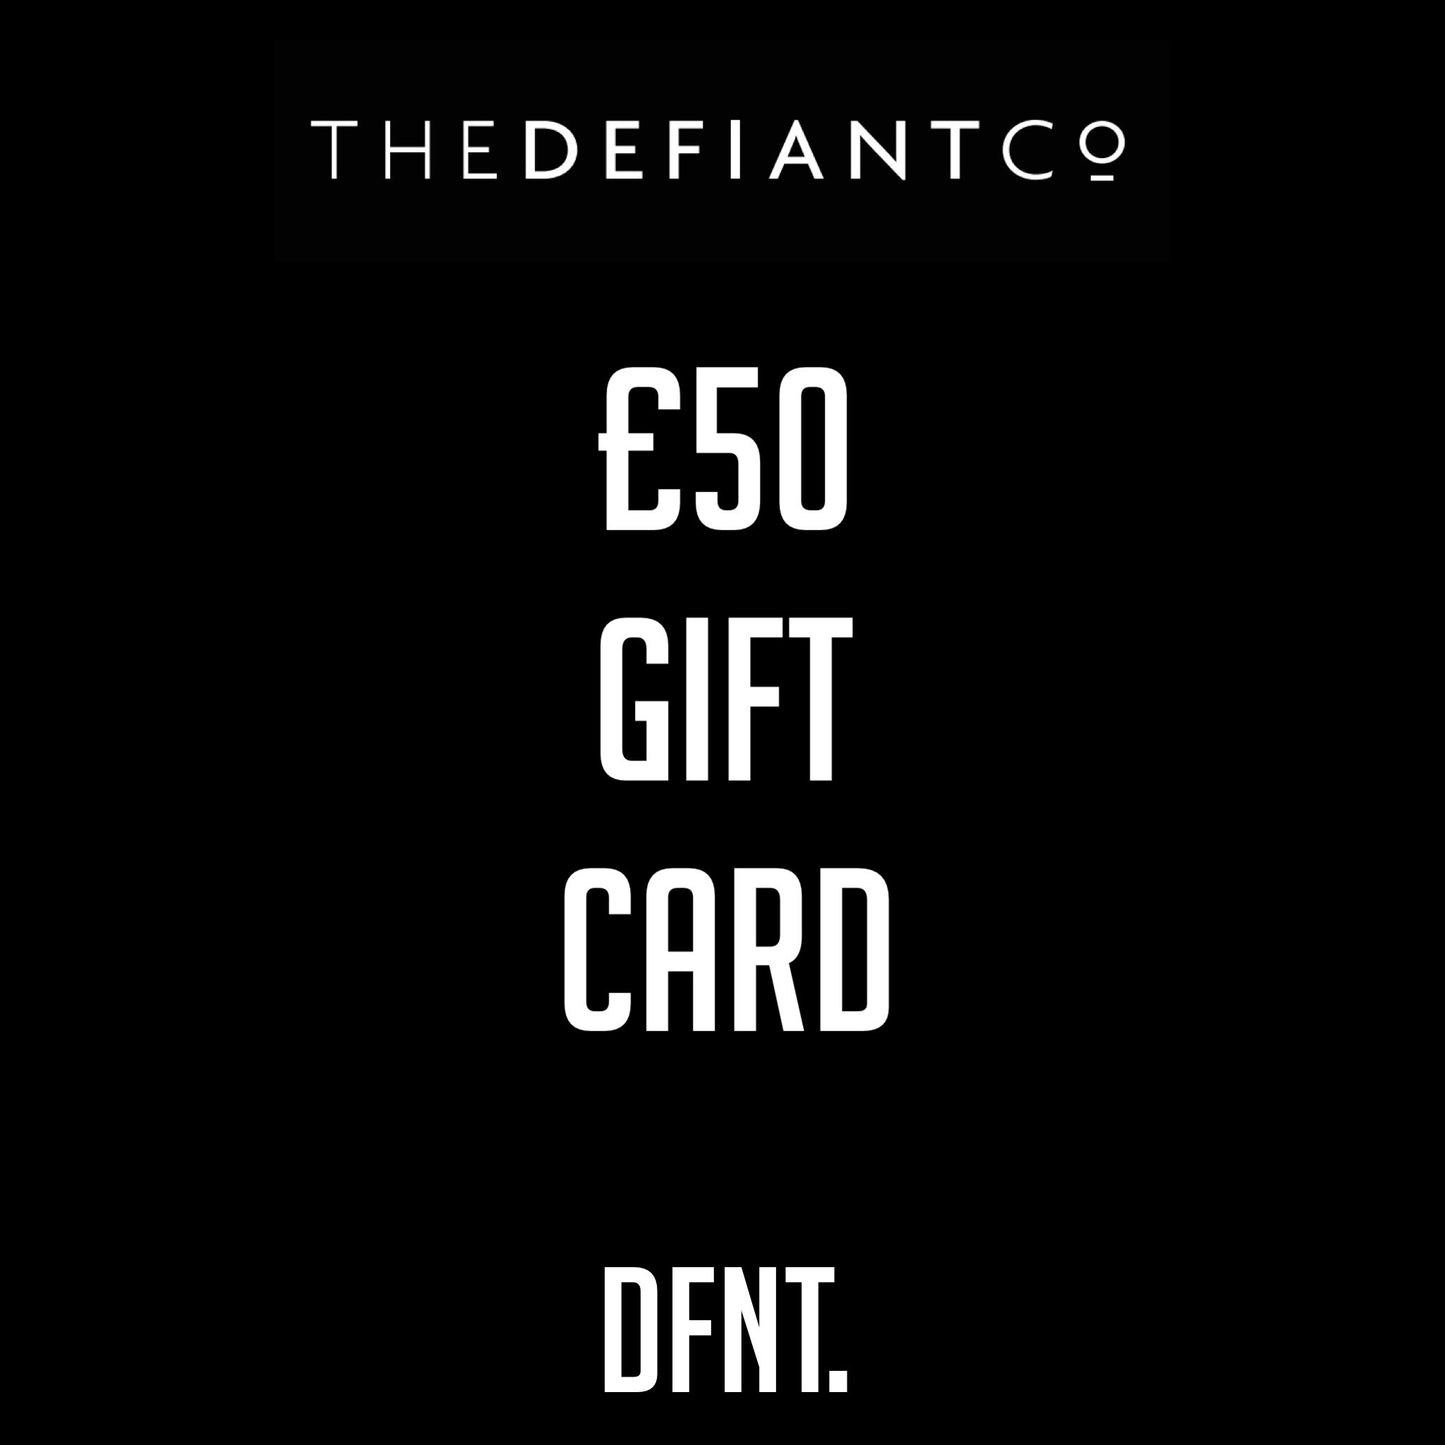 A photo of The Defiant co Gift Card.  The gift card shows both The Defiant Co and DFNT. logos at the top and bottom respectively. Gifts cards are a great gift idea for your friends and family. The centre displays the value of the Gift Card which is £50.